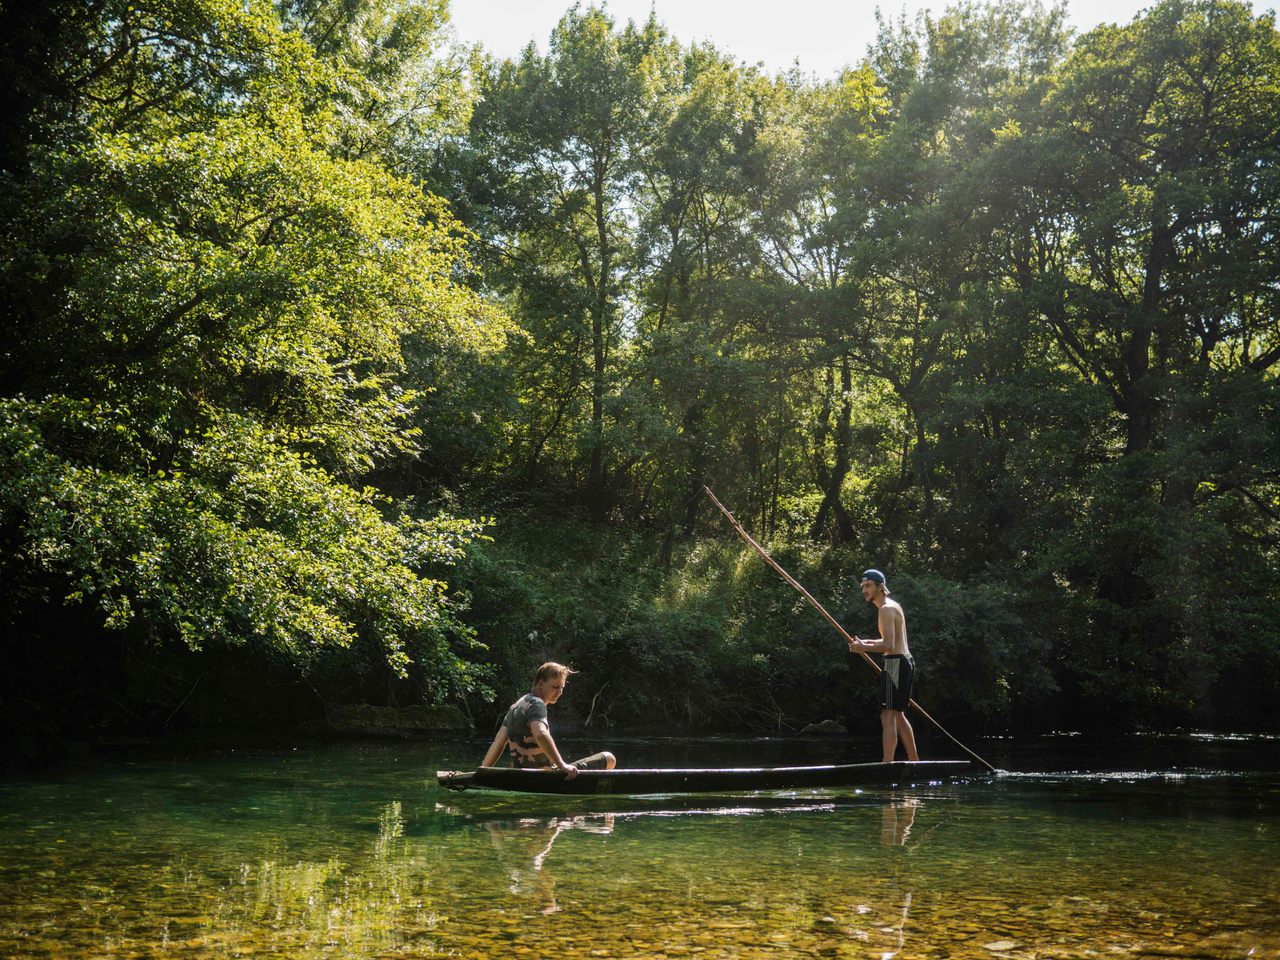 Taking a négo chin out on the cold, shallow waters of the Sorgues River offers respite from the Provençal summer's heat—nearly forgotten, the traditional wooden boats are enjoying a revival.